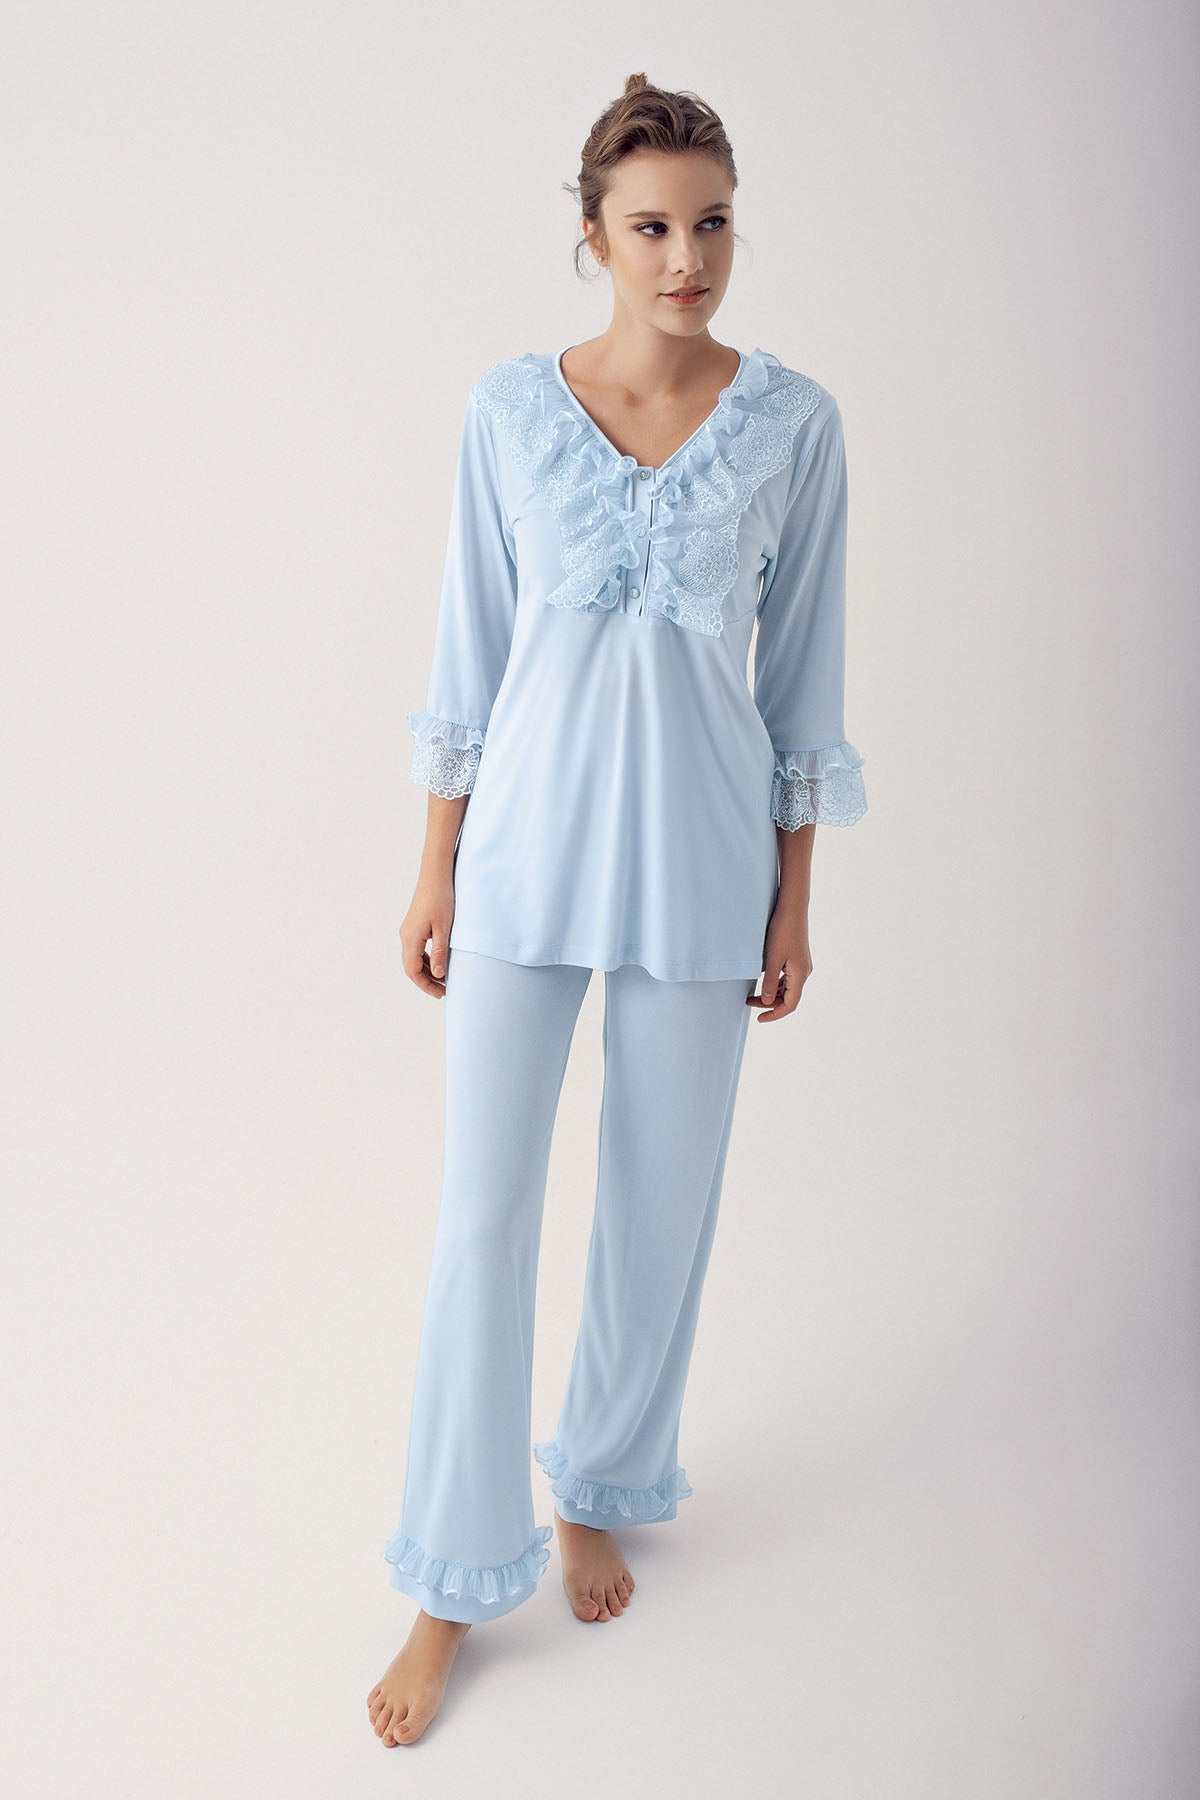 Shopymommy 14303 Leaf Lace 3-Pieces Maternity & Nursing Pajamas With Robe Blue